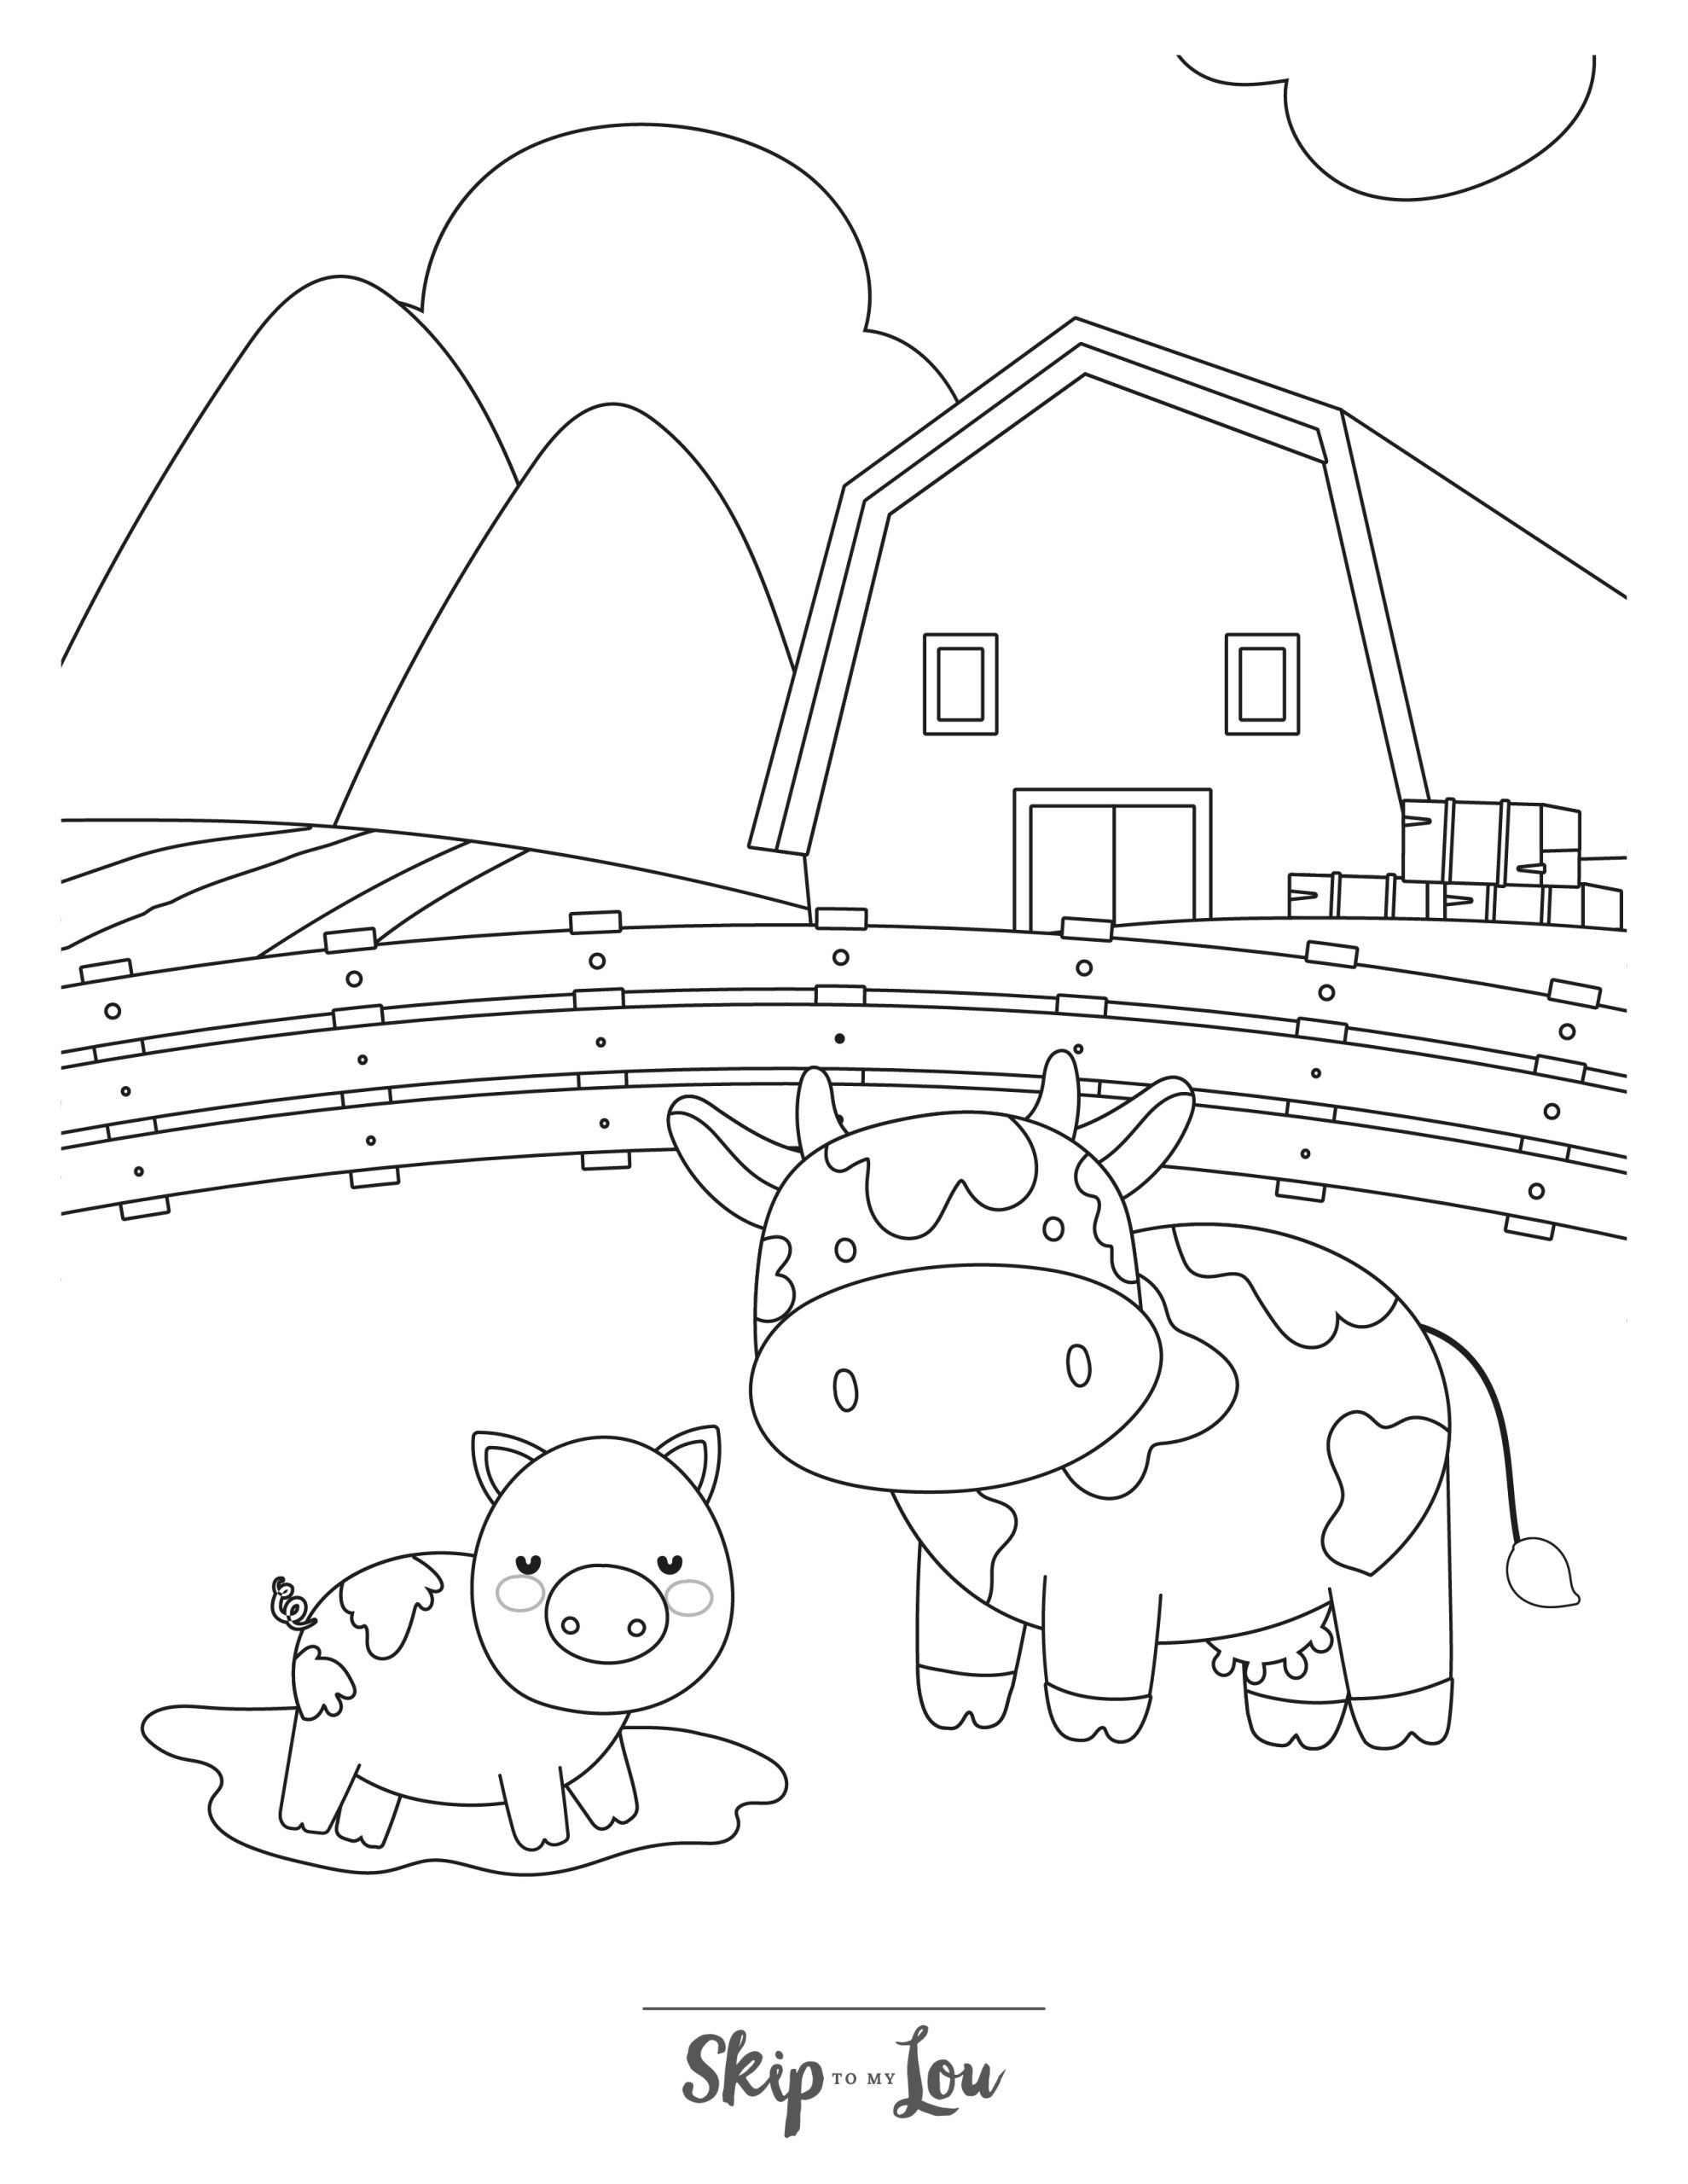 Farm Coloring Page 4 - A line drawing of a farm scene with a cow and small pig in the foreground. A long fence, a barn, a field, and mountains are in the background. 